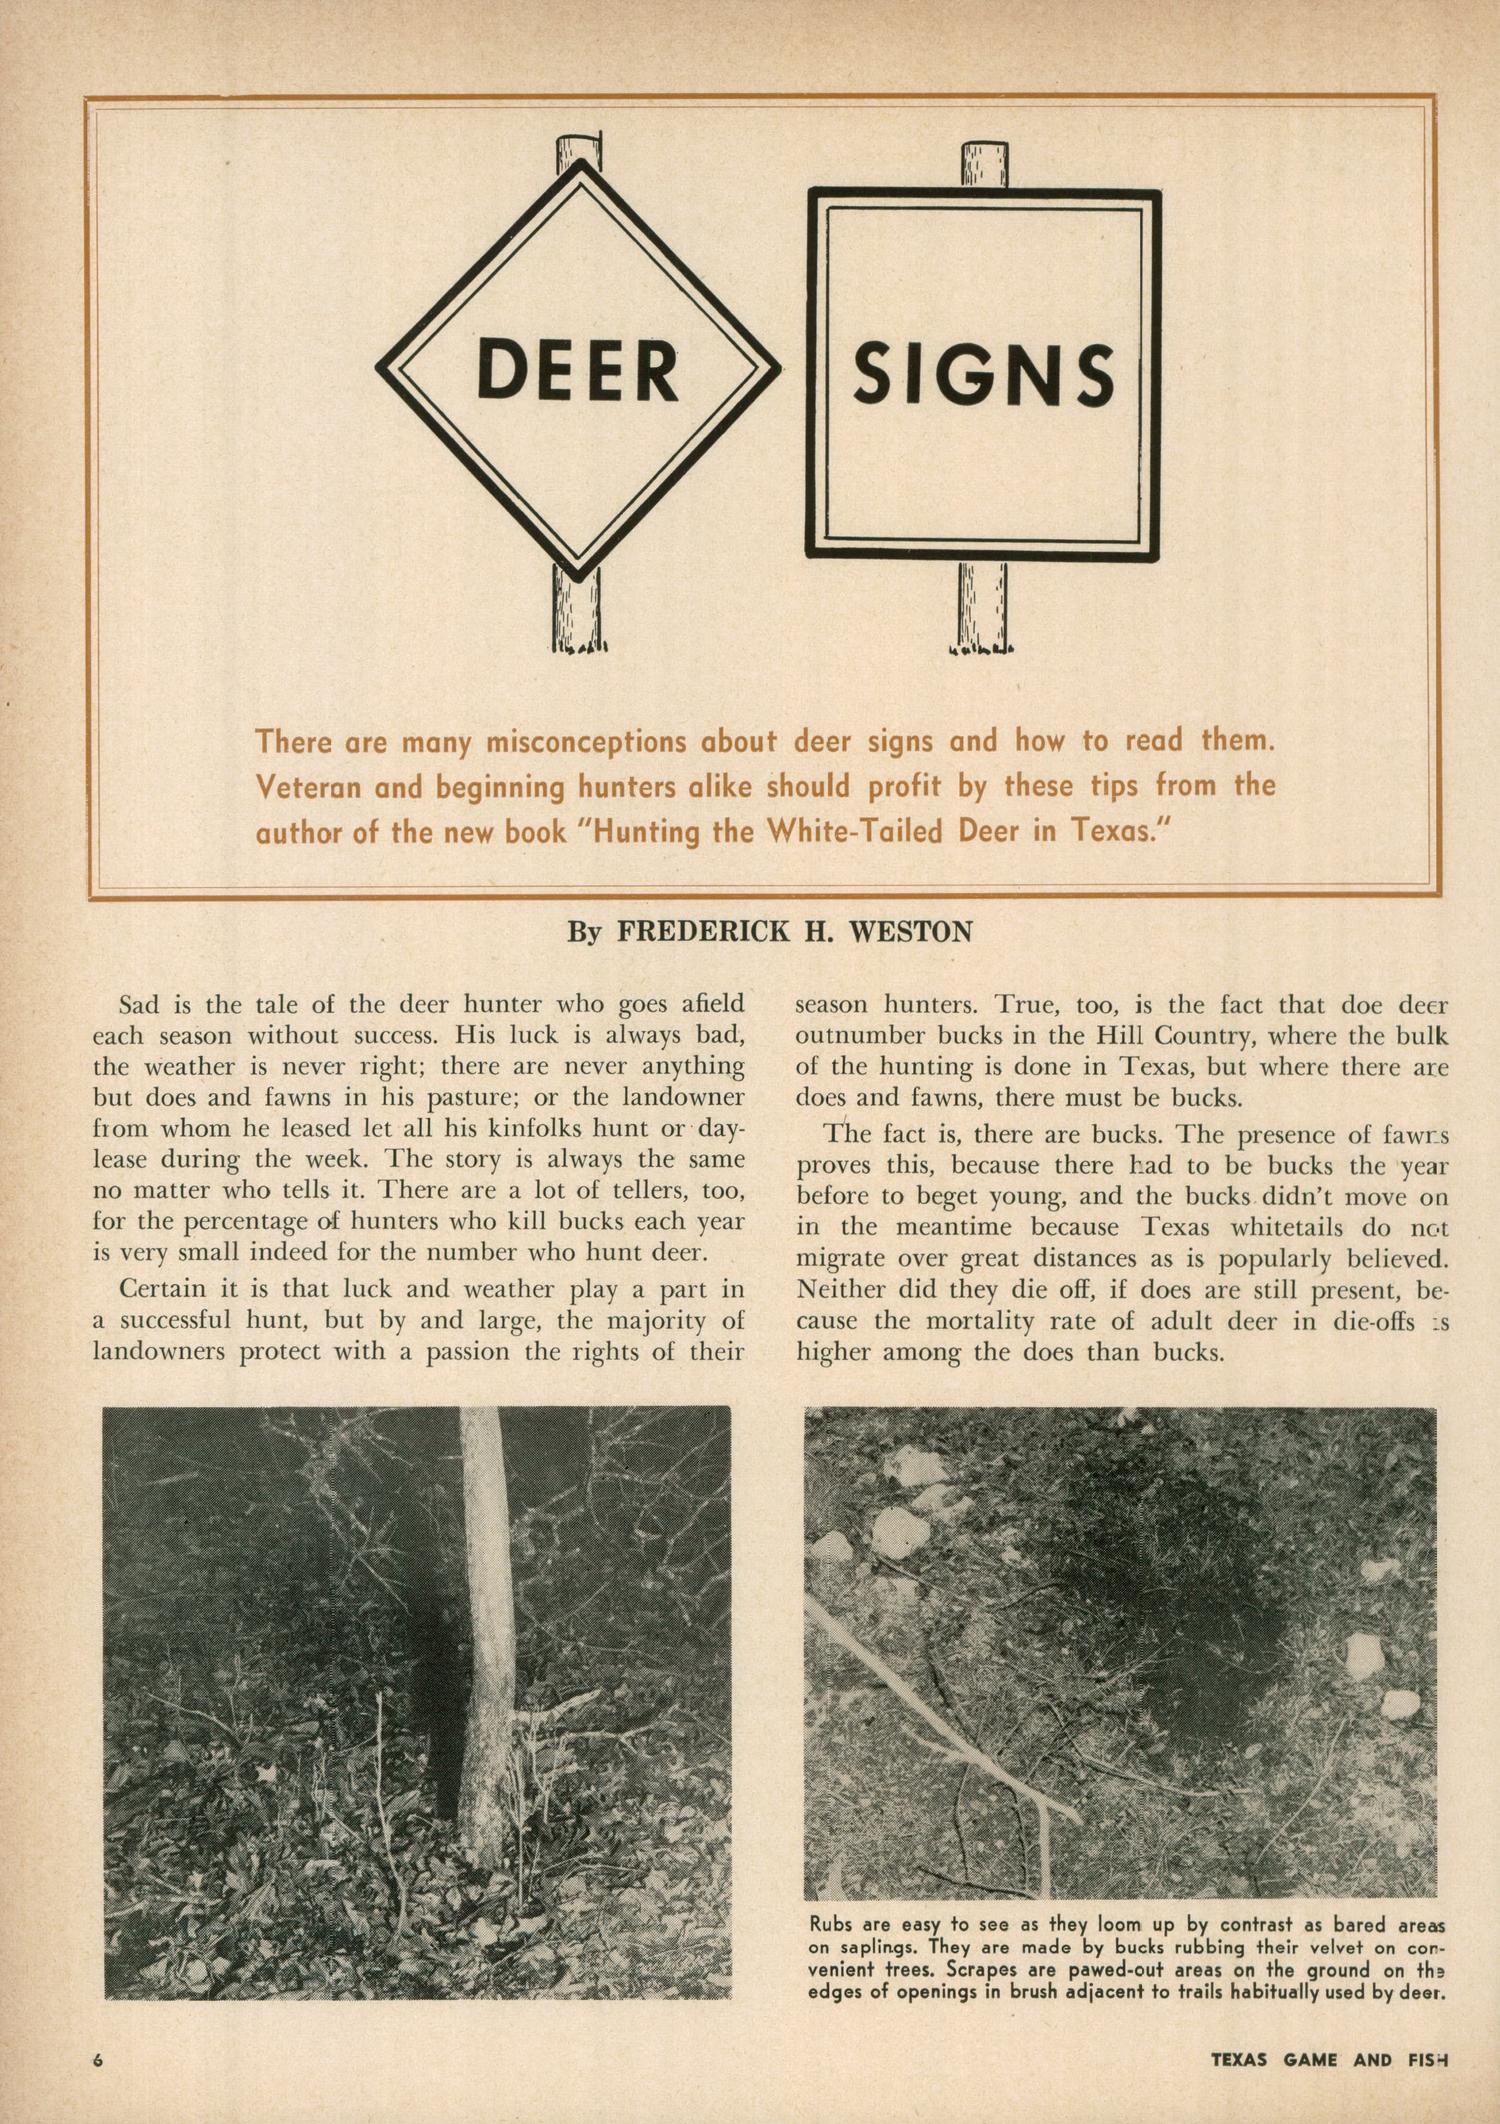 Texas Game and Fish, Volume 12, Number 11, October 1954
                                                
                                                    6
                                                